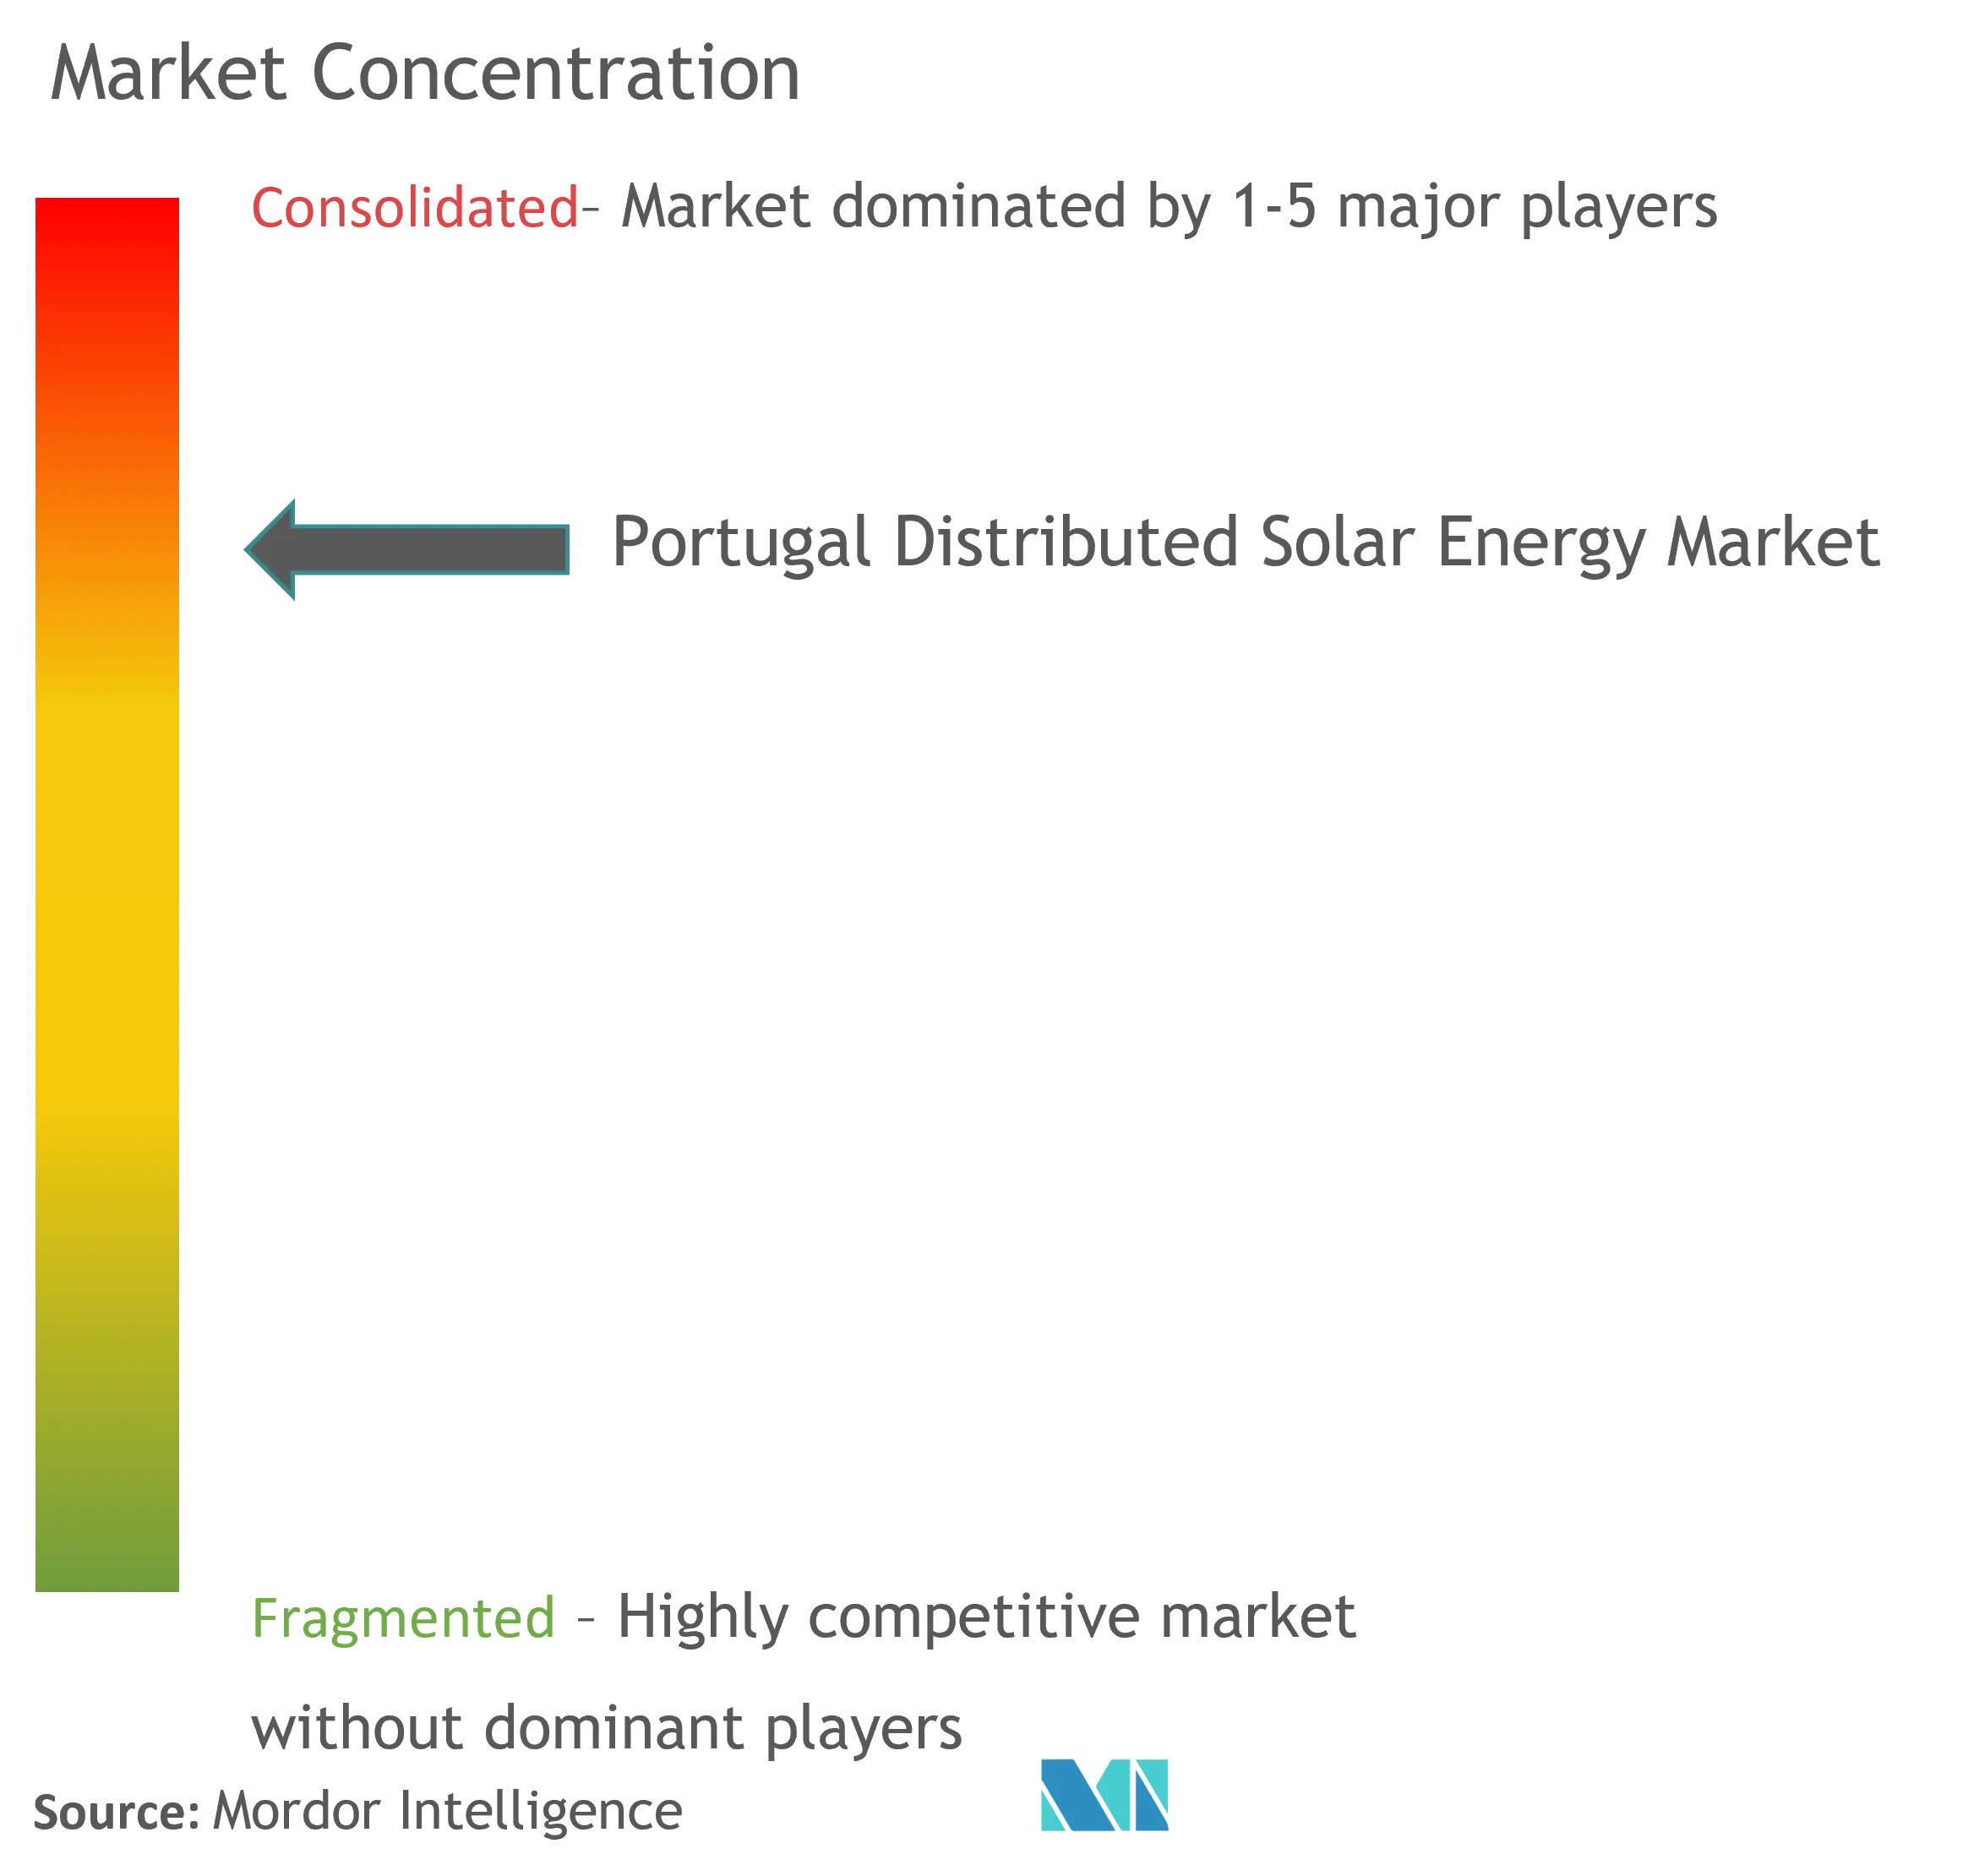 Portugal Distributed Solar Energy Market Concentration